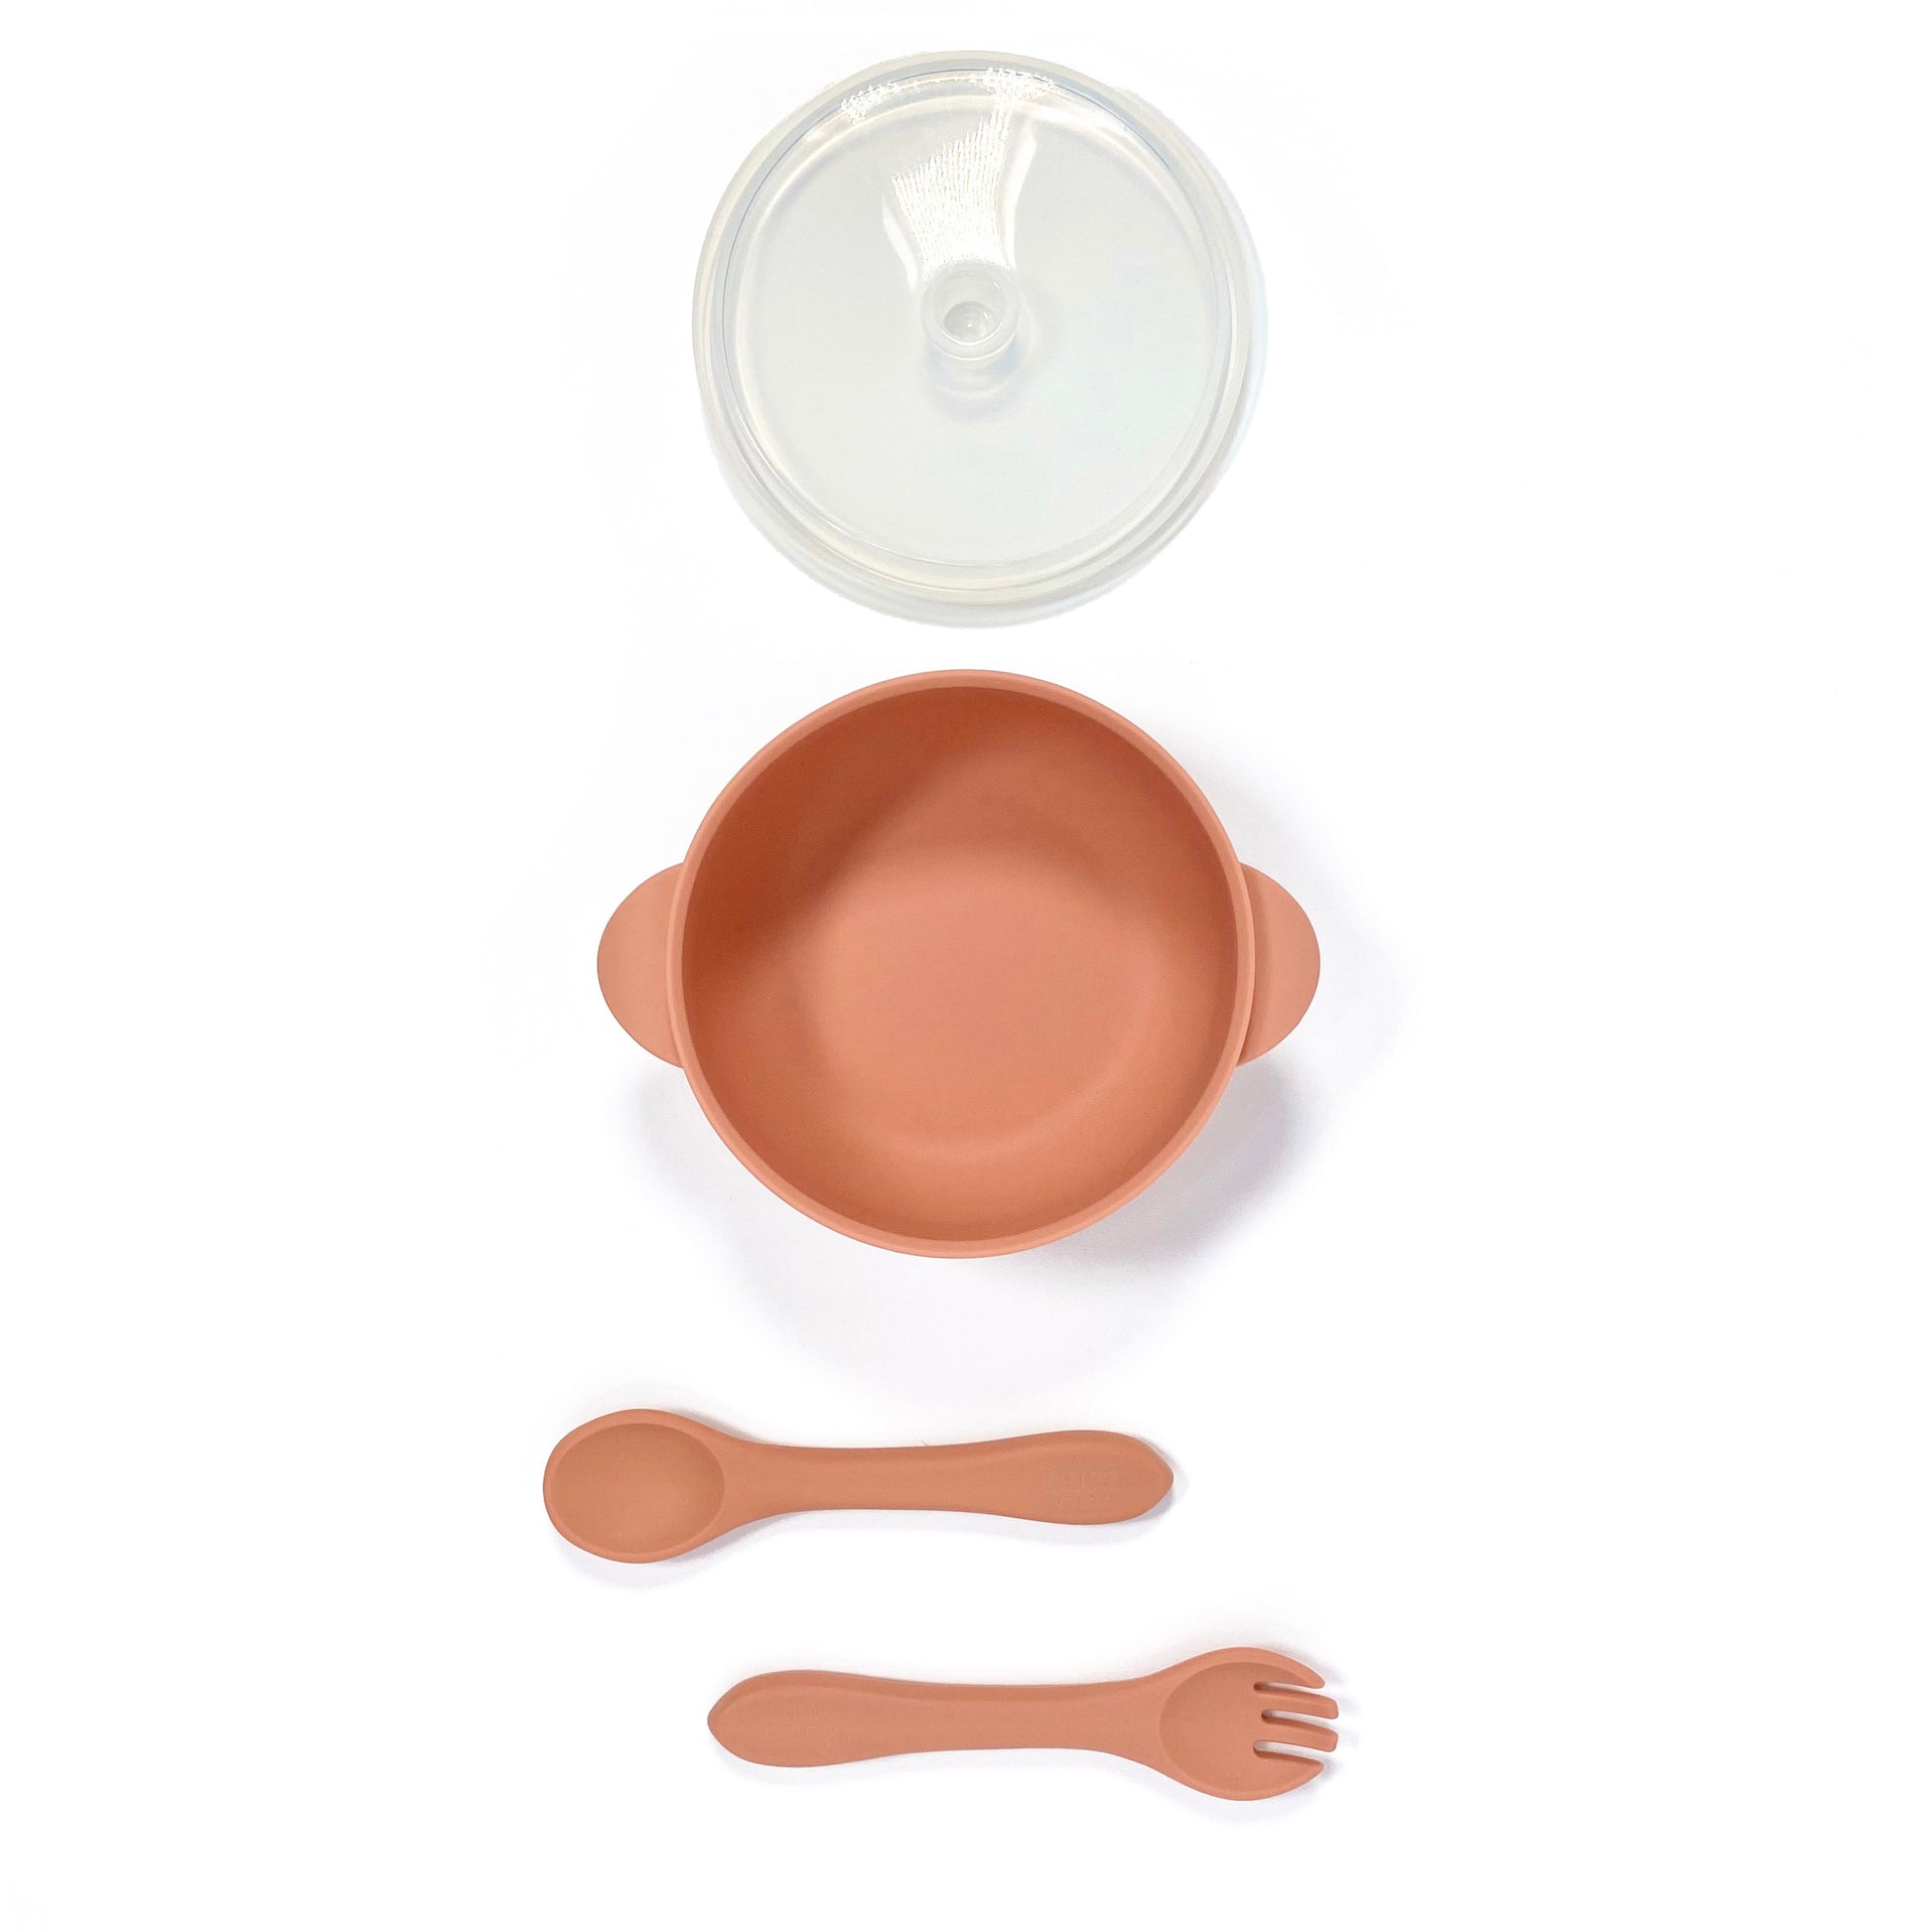 A sunset orange silicone children’s feeding set, including silicone bowl with lid and matching silicone cutlery. Image shows the bowl, lid and cutlery separately, from above.